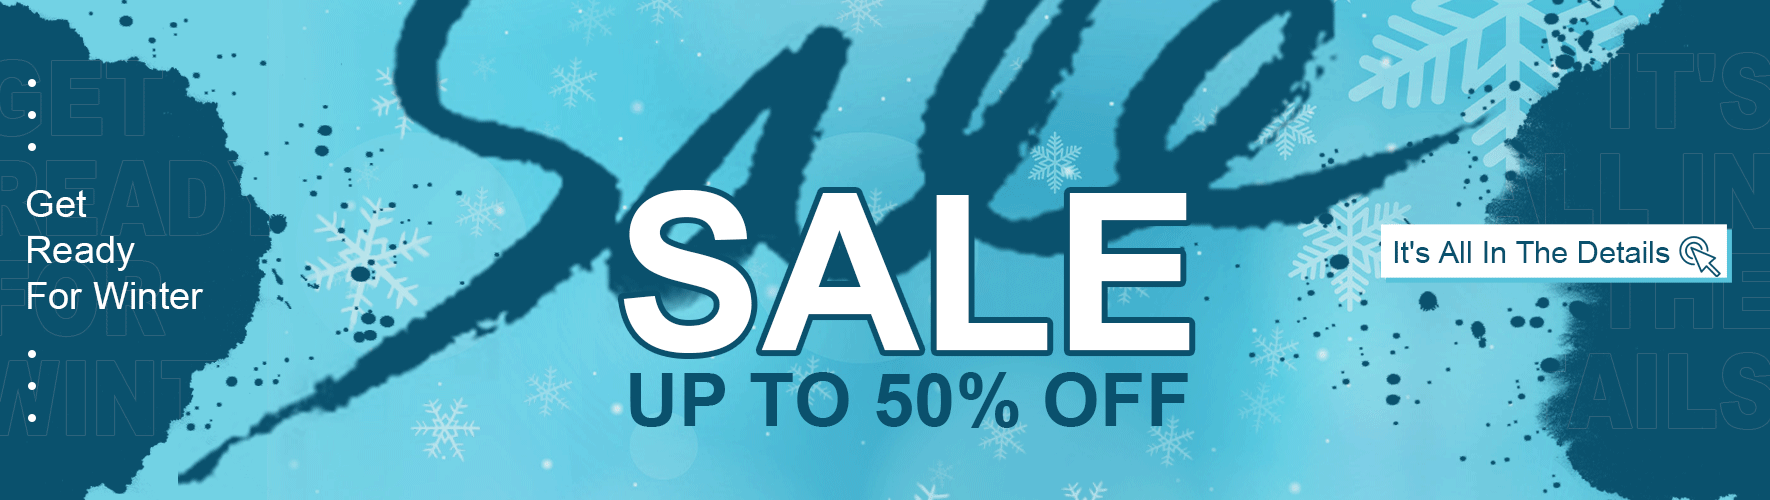 Wholesale Get Ready For Winter Up To 50% OFF Best Deal